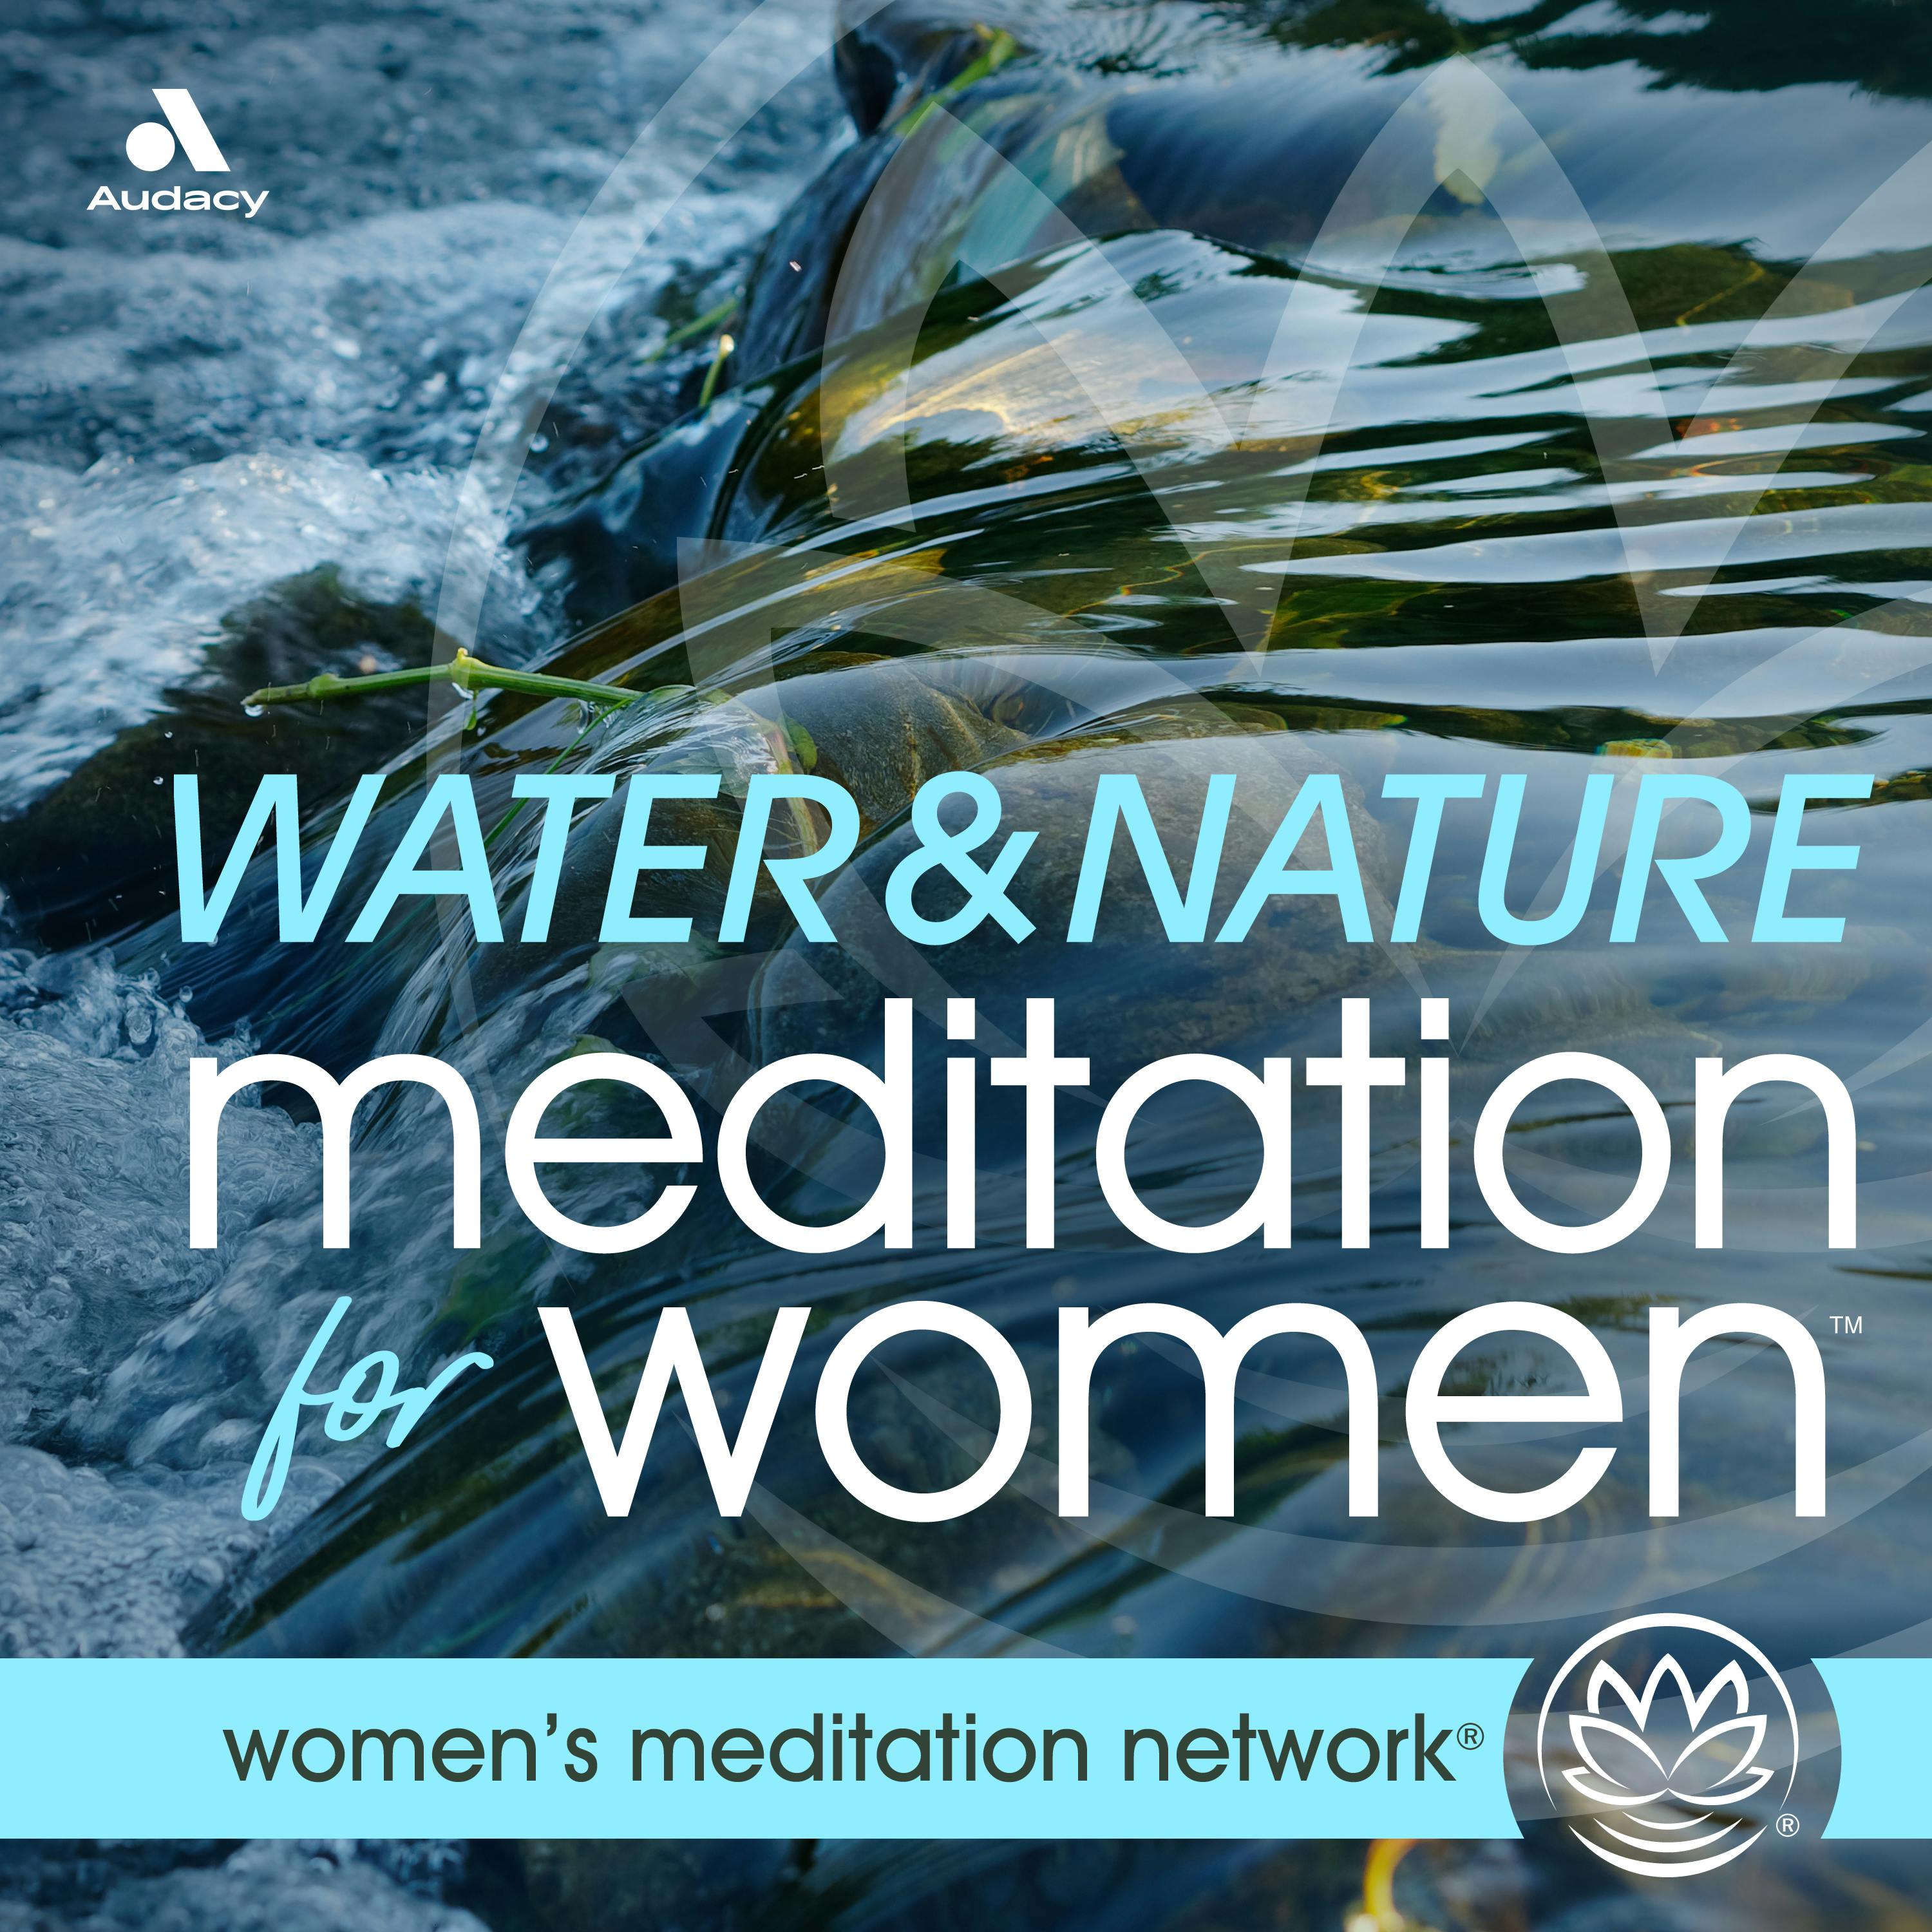 Water & Nature Sounds Meditation for Women PREMIUM podcast tile